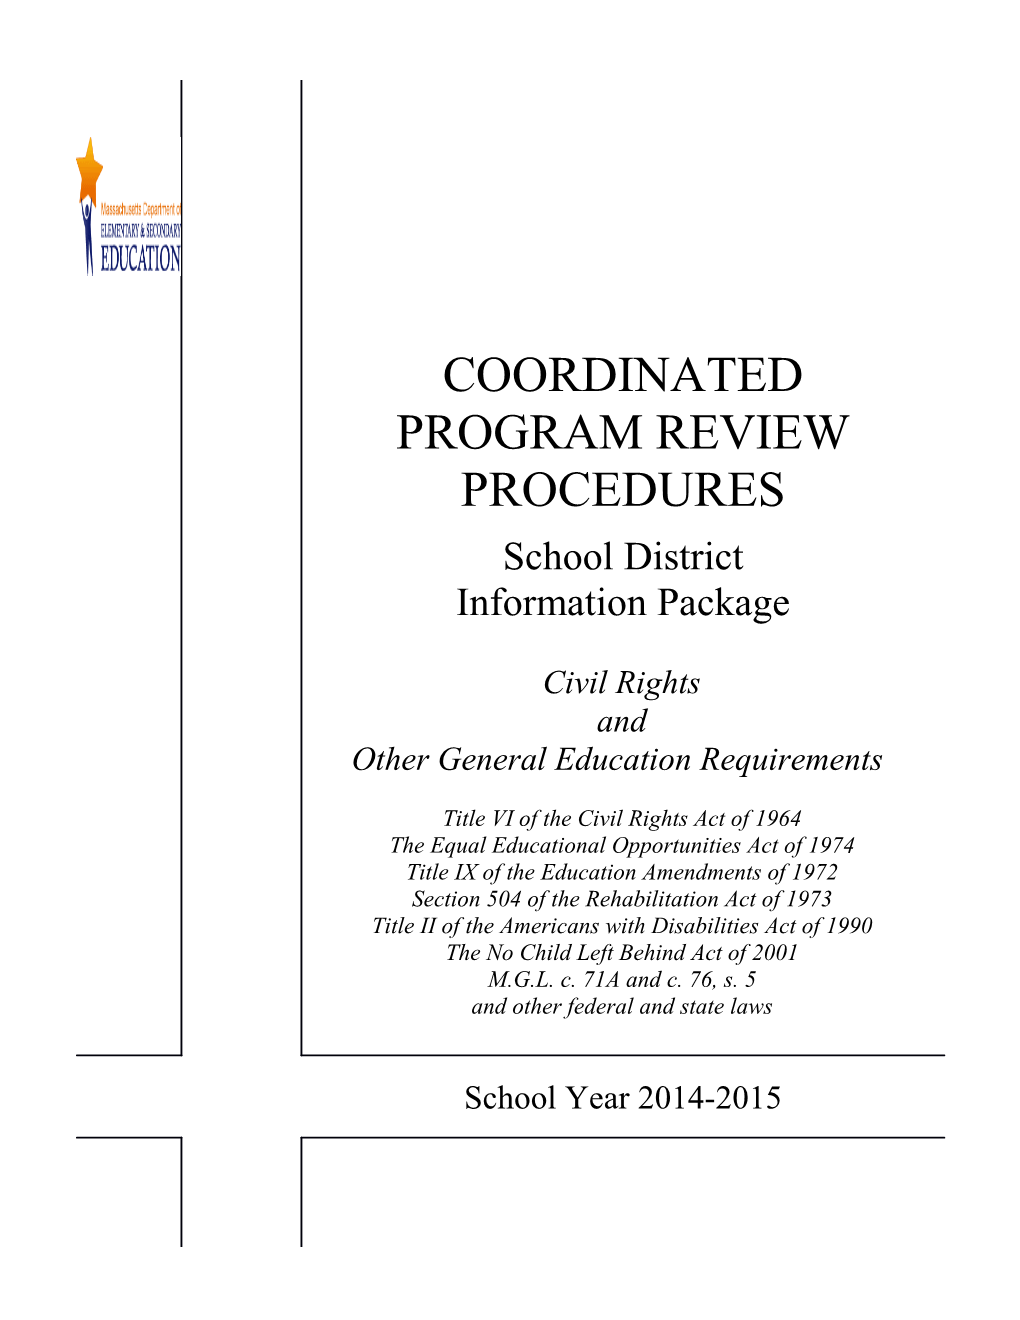 2014-2015 Civil Rights Information Package